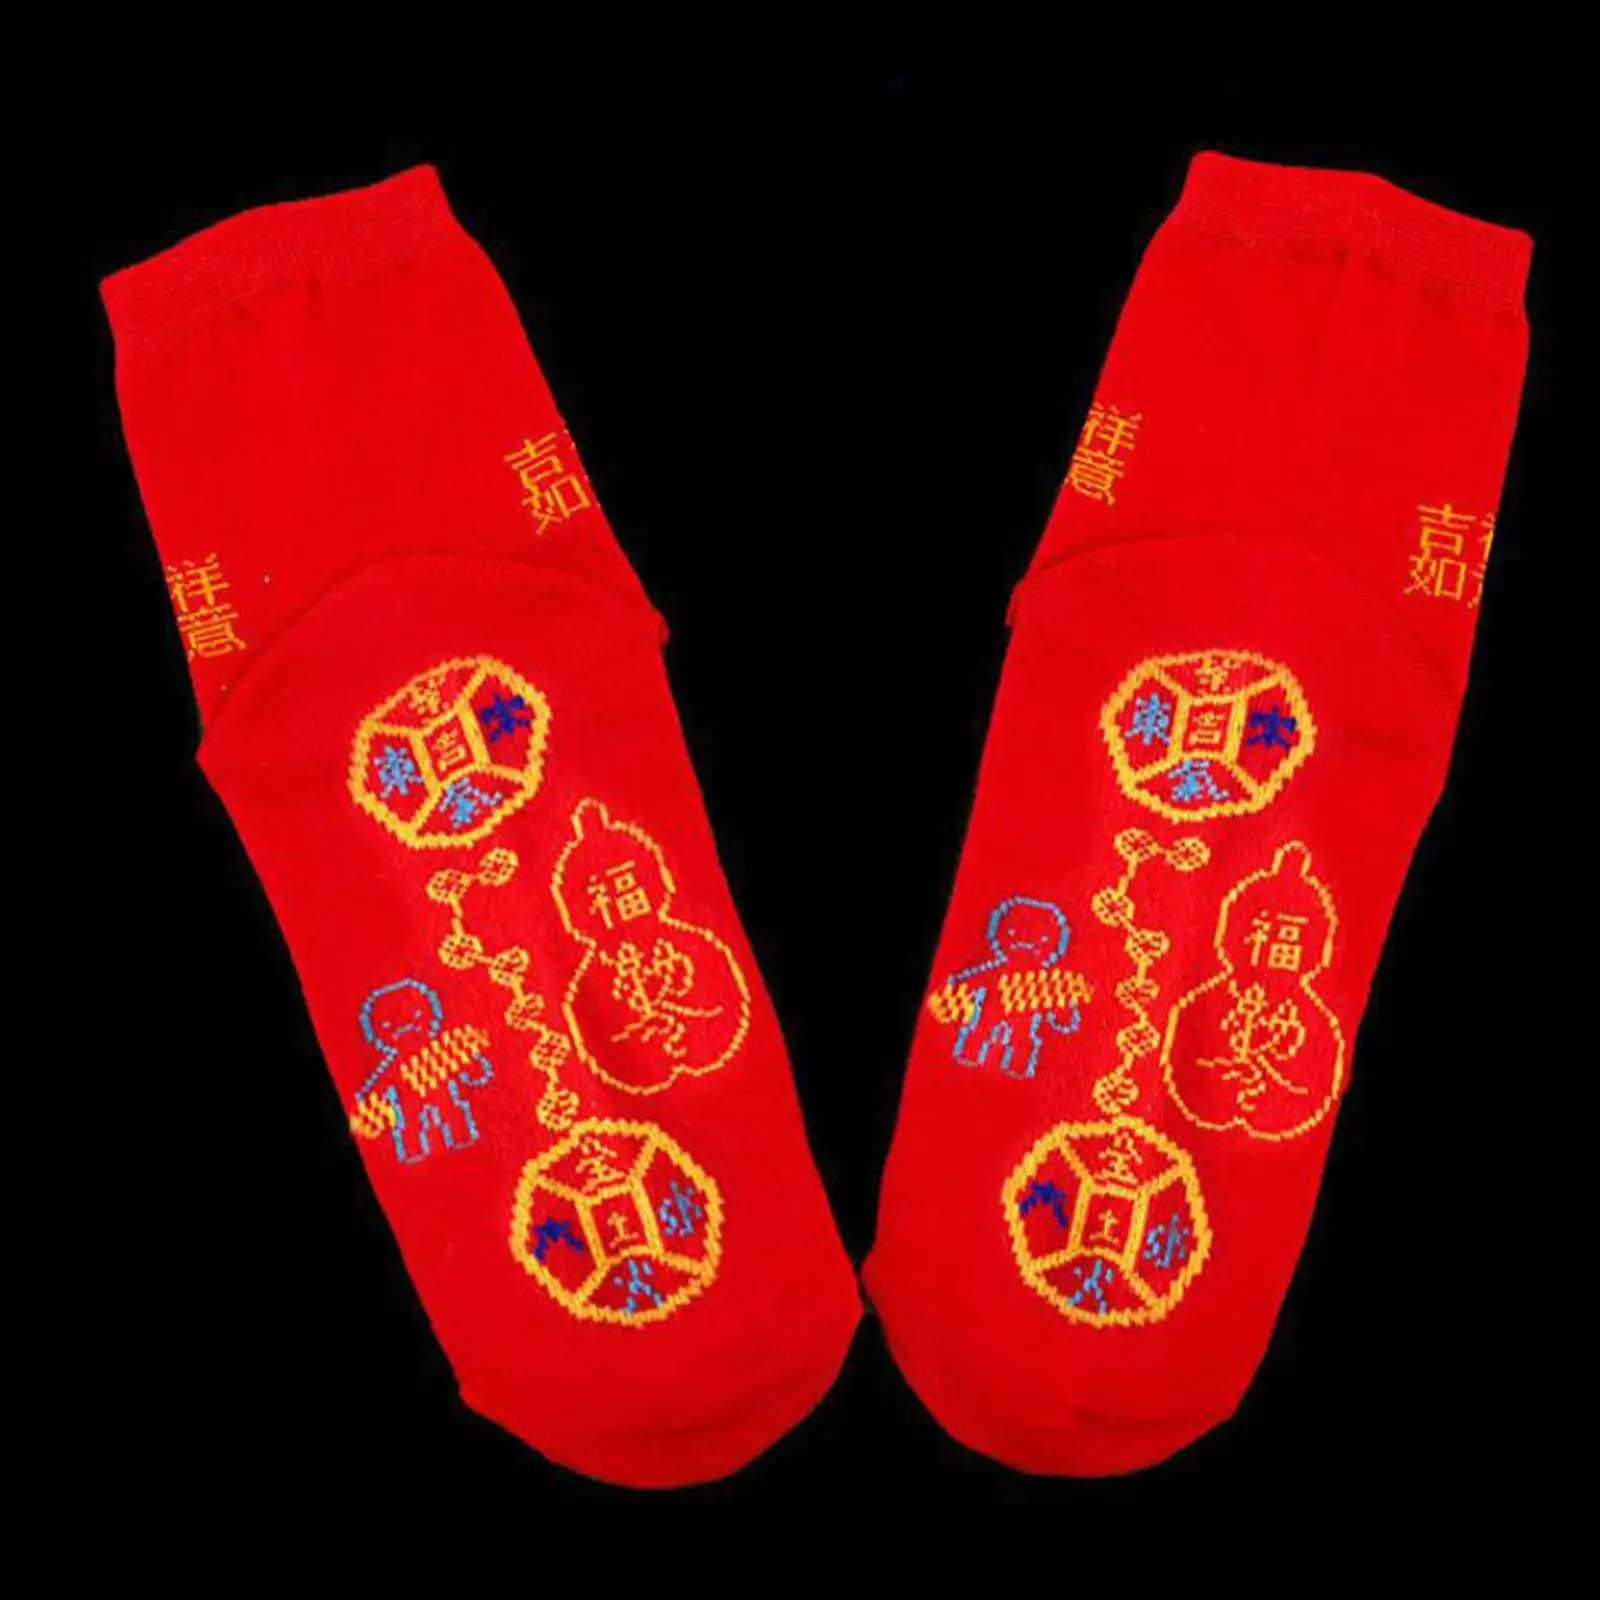 Unisex Sport Socks Swear Absorbing Durable  Size Breathable Red Socks for  Wear Festivals Volleyball New Year Gift